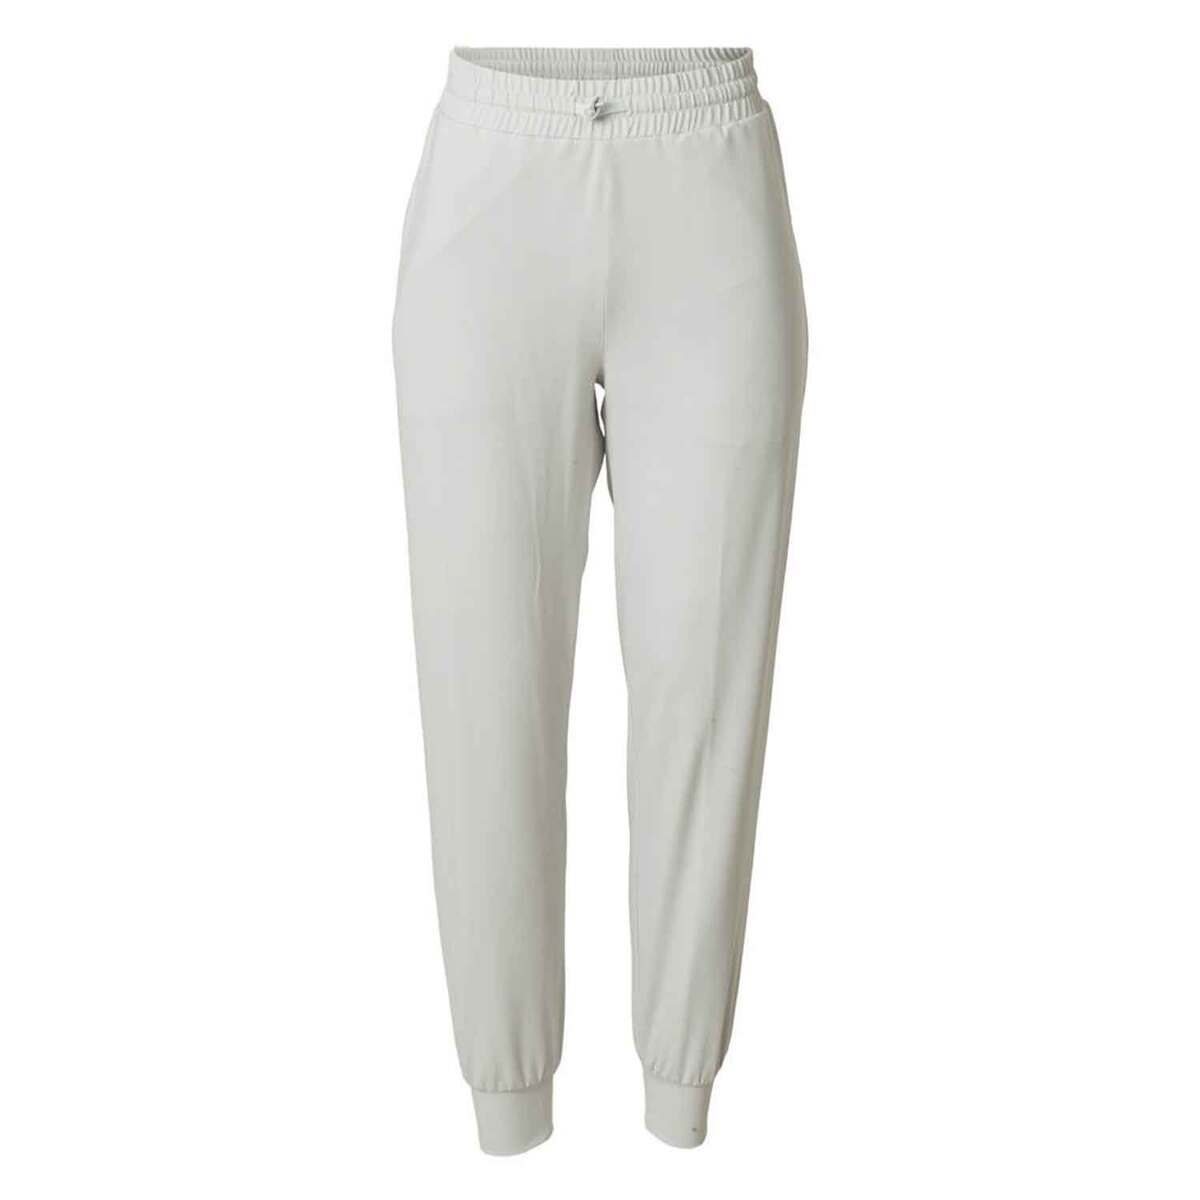 Banded Women's Glades Casual Joggers | Sportsman's Warehouse